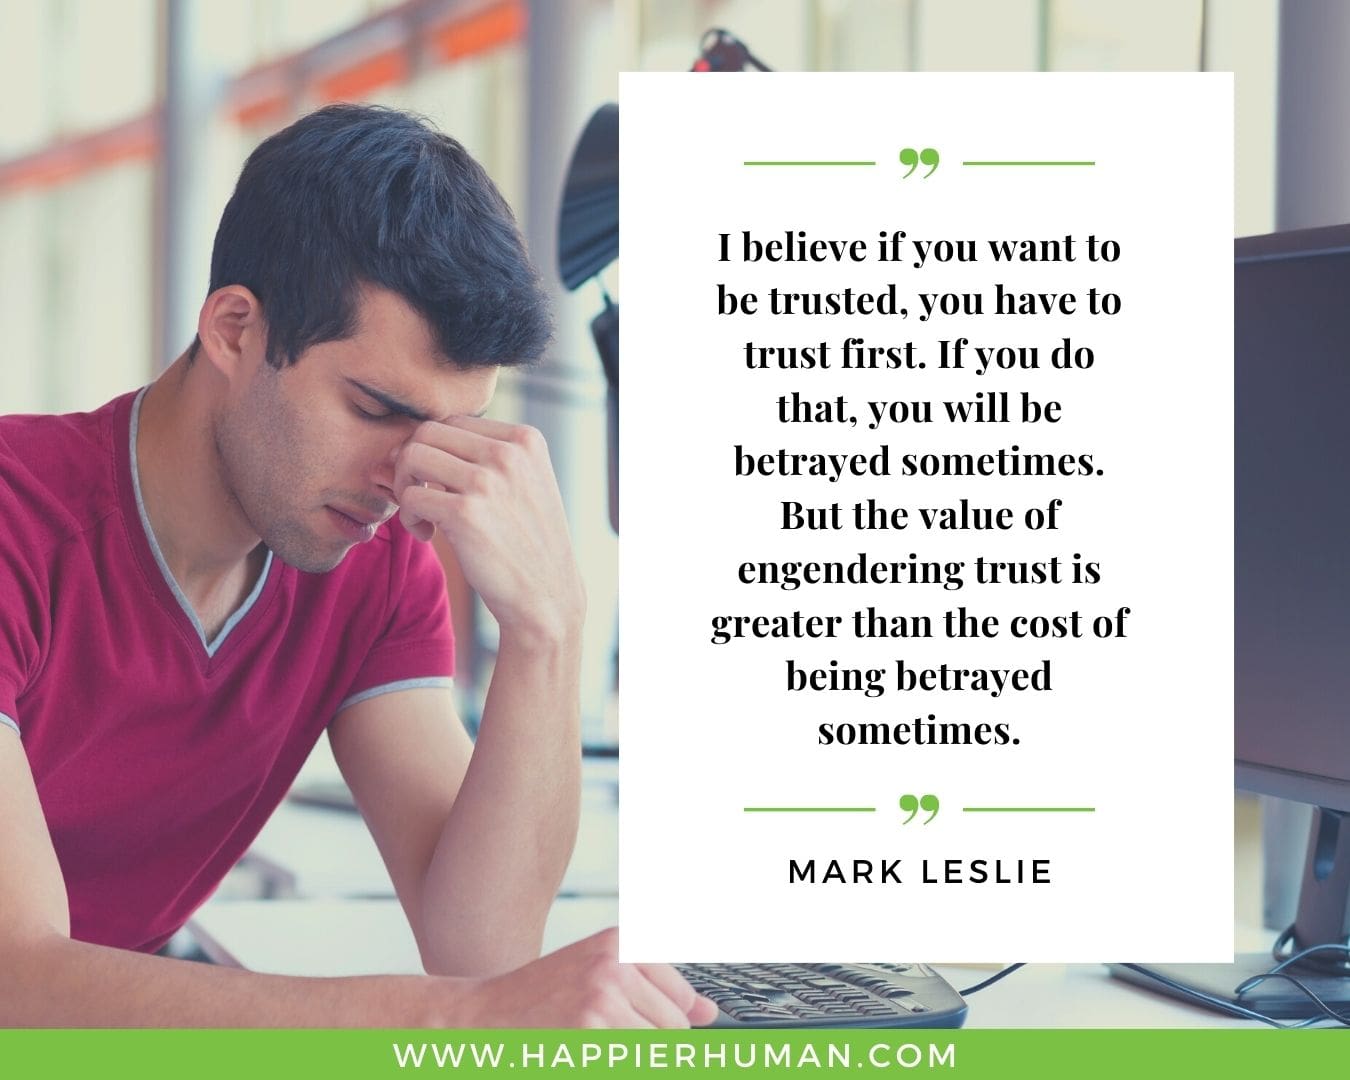 Broken Trust Quotes - “I believe if you want to be trusted, you have to trust first. If you do that, you will be betrayed sometimes. But the value of engendering trust is greater than the cost of being betrayed sometimes.” - Mark Leslie